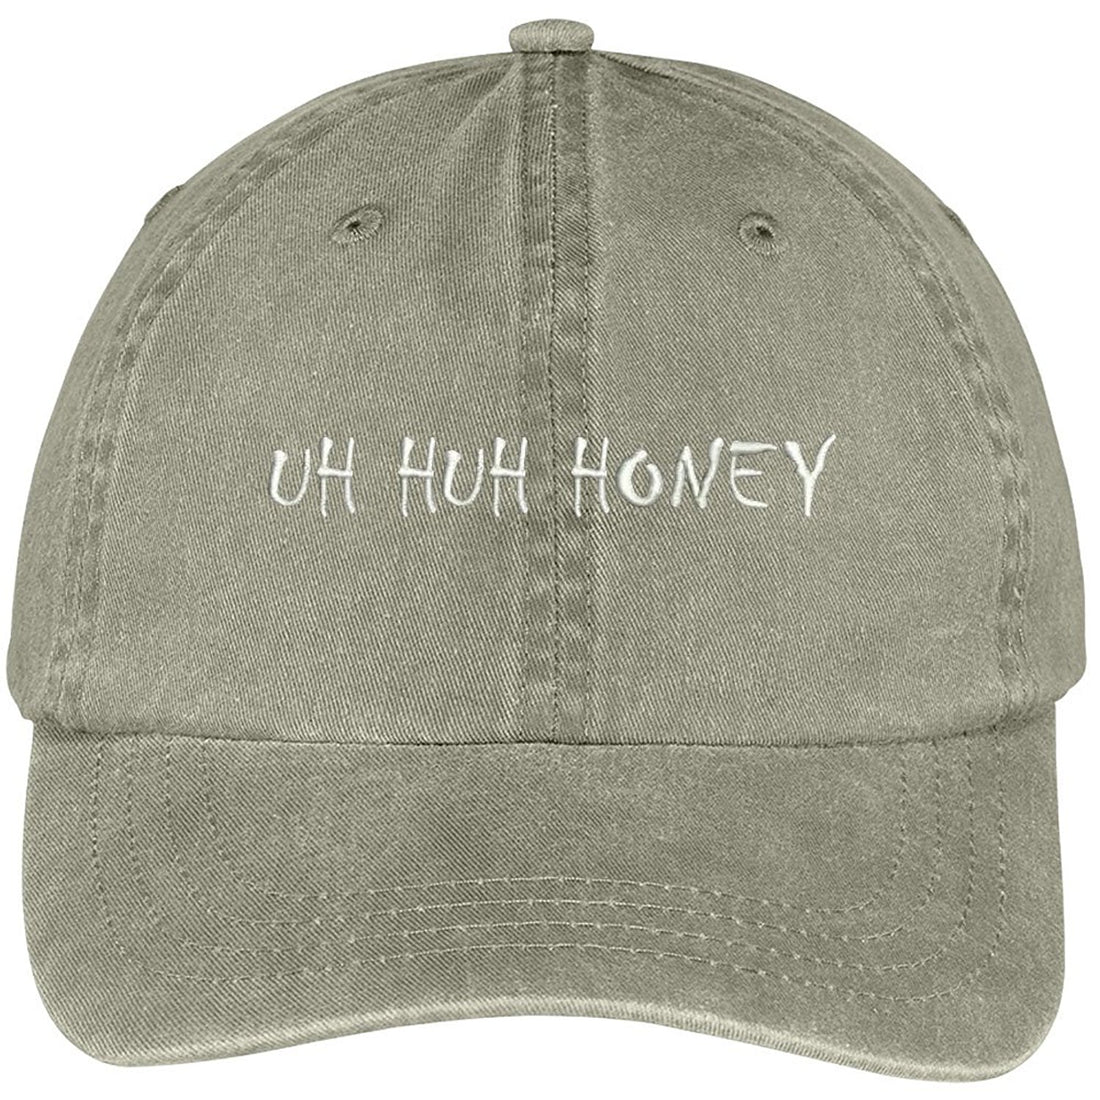 Trendy Apparel Shop Uh Huh Honey Embroidered Washed Cotton Adjustable Cap